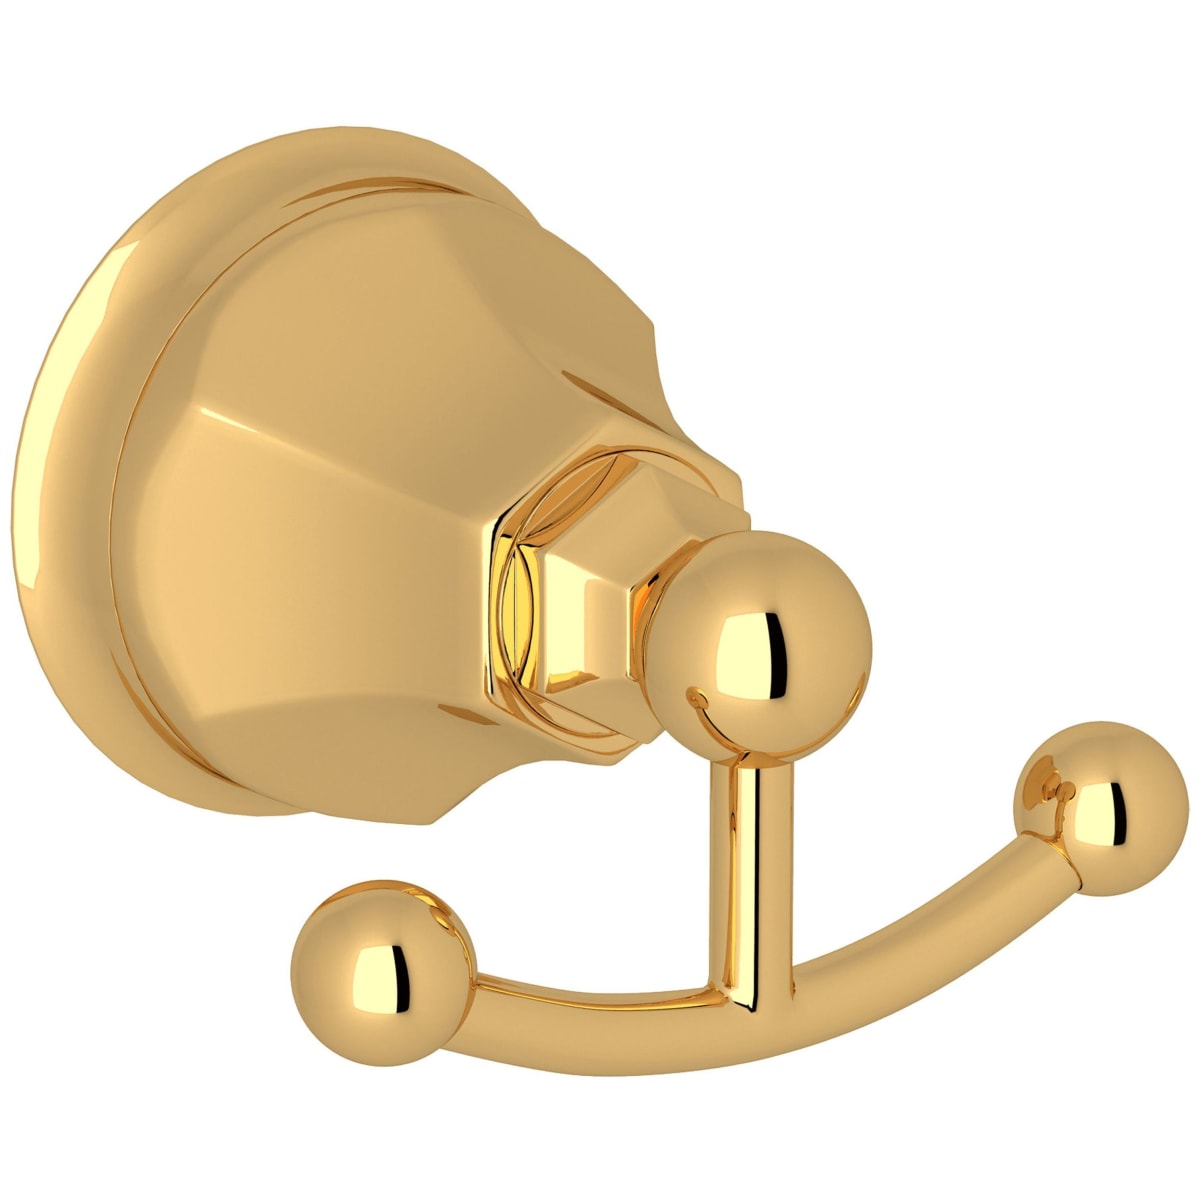 Rohl A6881IB Palladian Double Robe Hook | Build.com